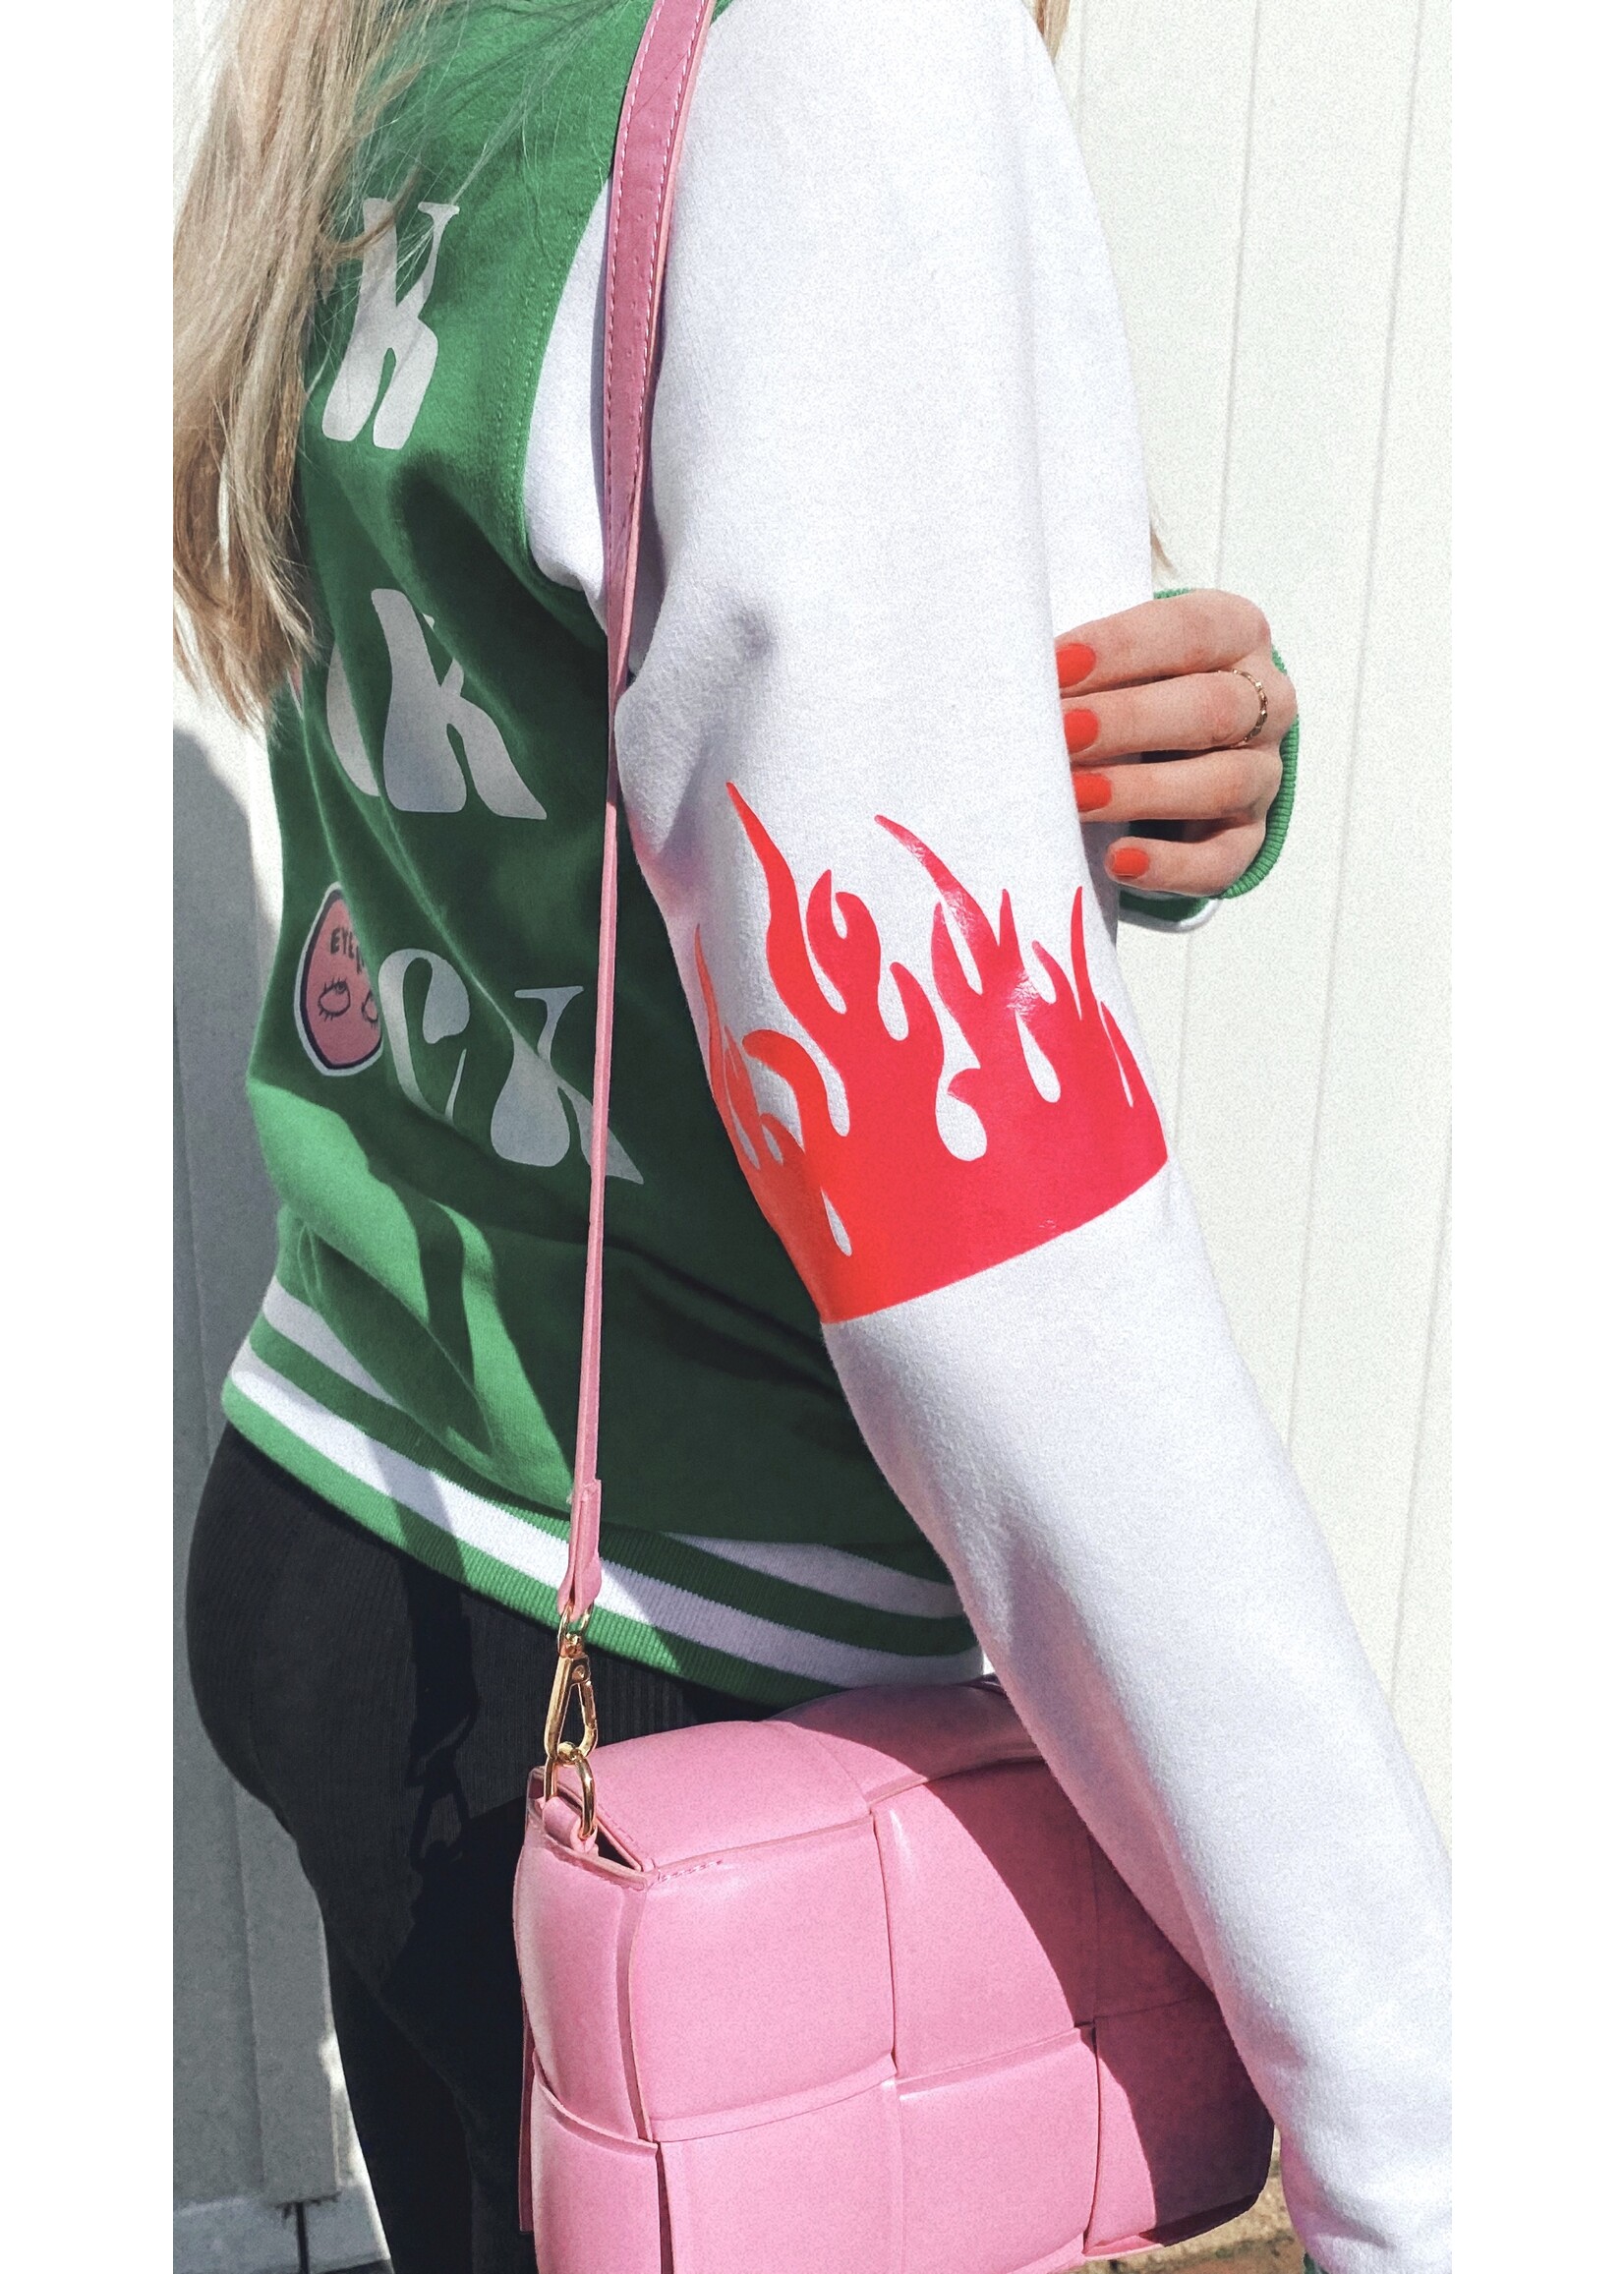 YOU ARE SPECIAL "Pink Flames" Green Baseball Jacket (1 exemplaar)